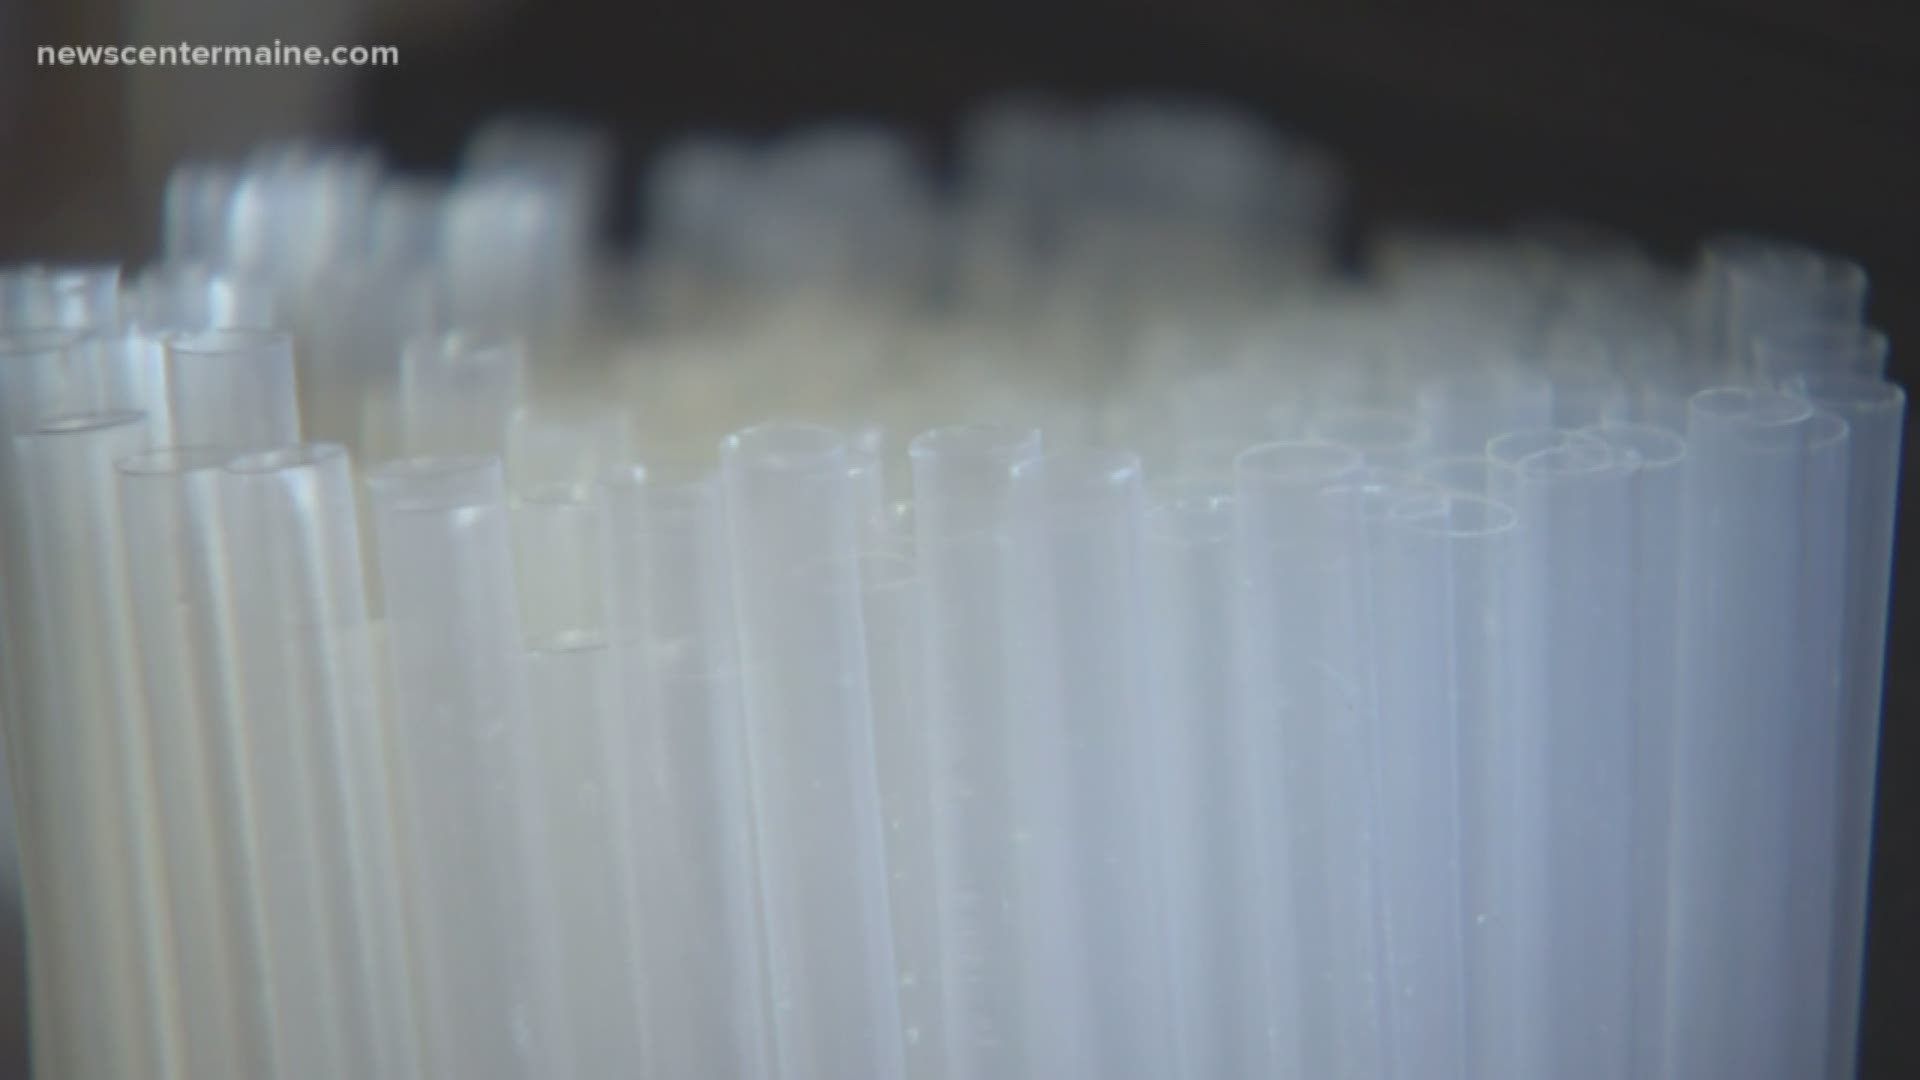 Maine's largest city is phasing out a common food utensil. Starting next April, plastic straws will be banned in Portland unless someone asks for one.